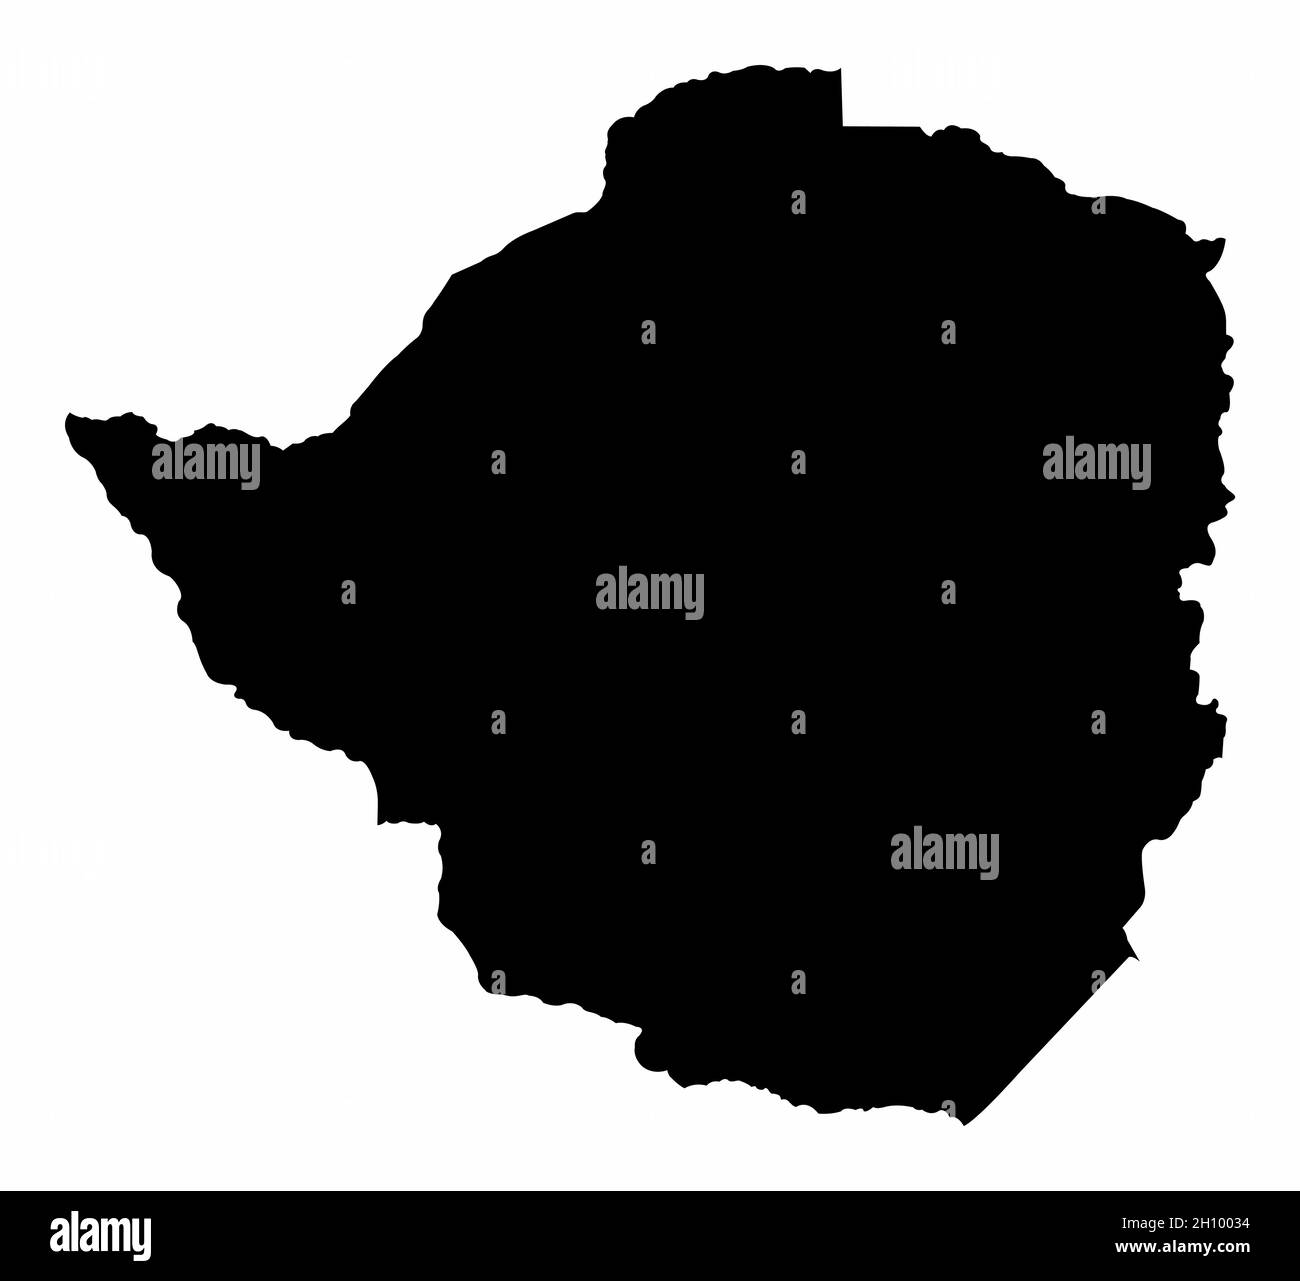 Zimbabwe silhouette map isolated on white background Stock Vector